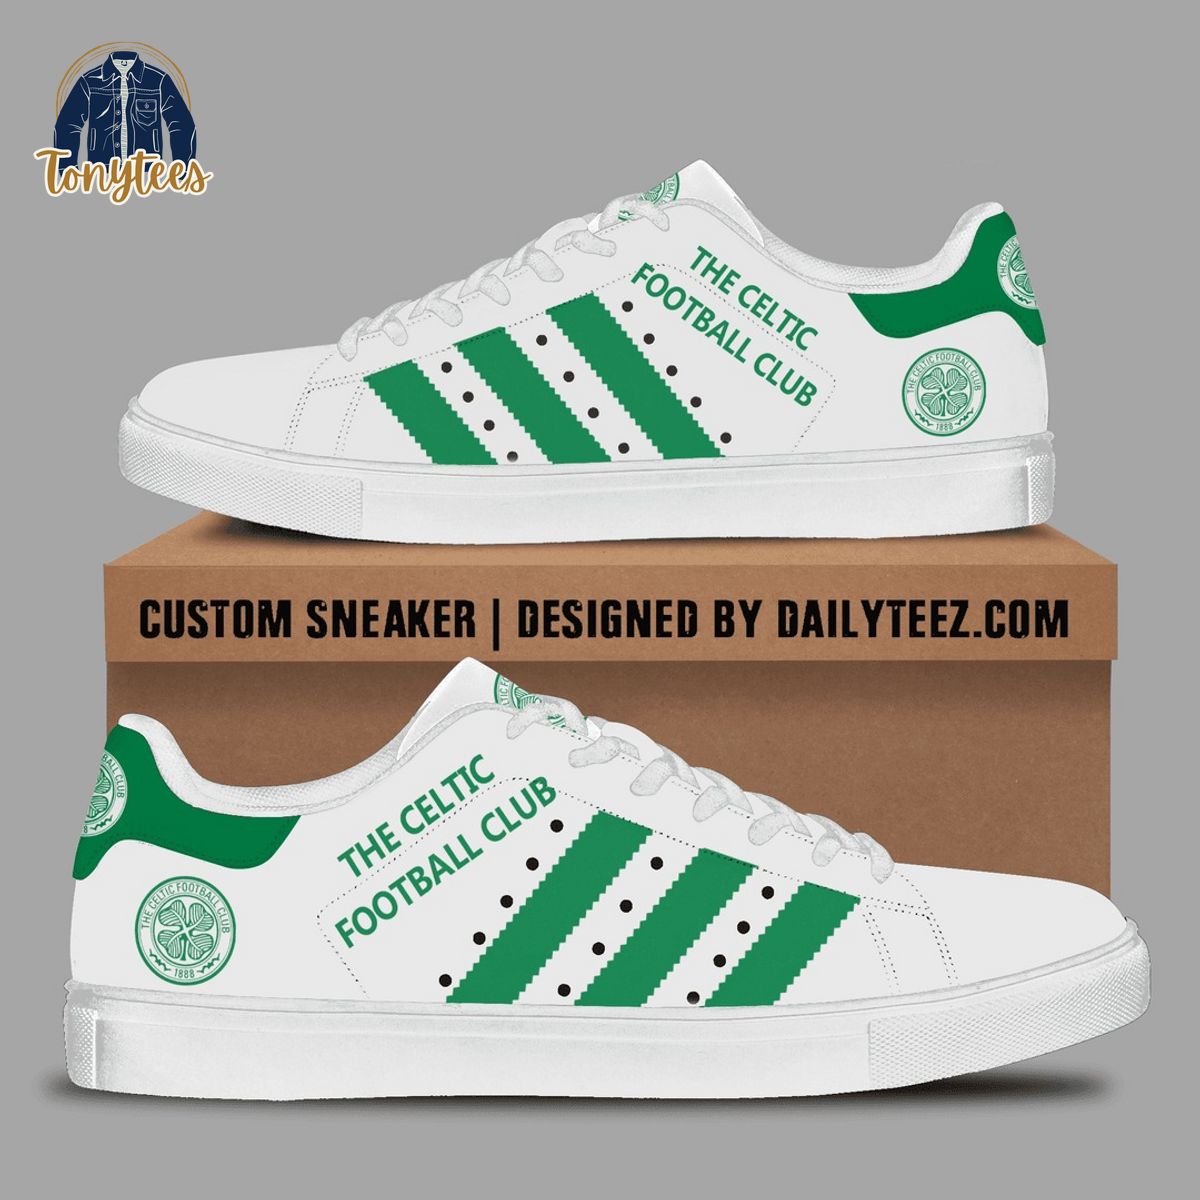 The Celtic Football Club Stan Smith Shoes